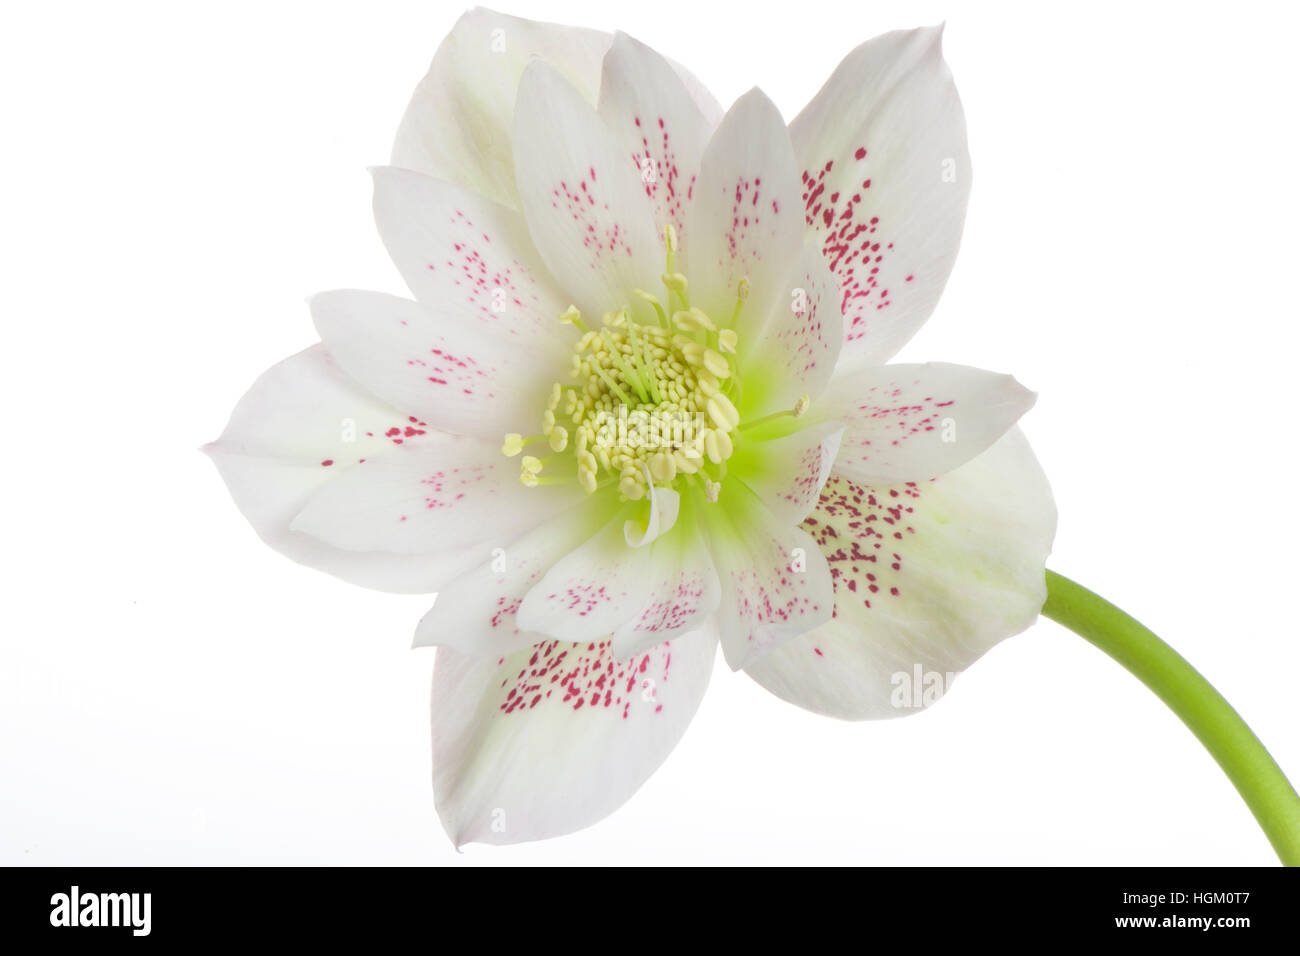 High-key image of a spring Hellebore flower also known as the Lenten or Christmas Rose, image taken against a white background Stock Photo